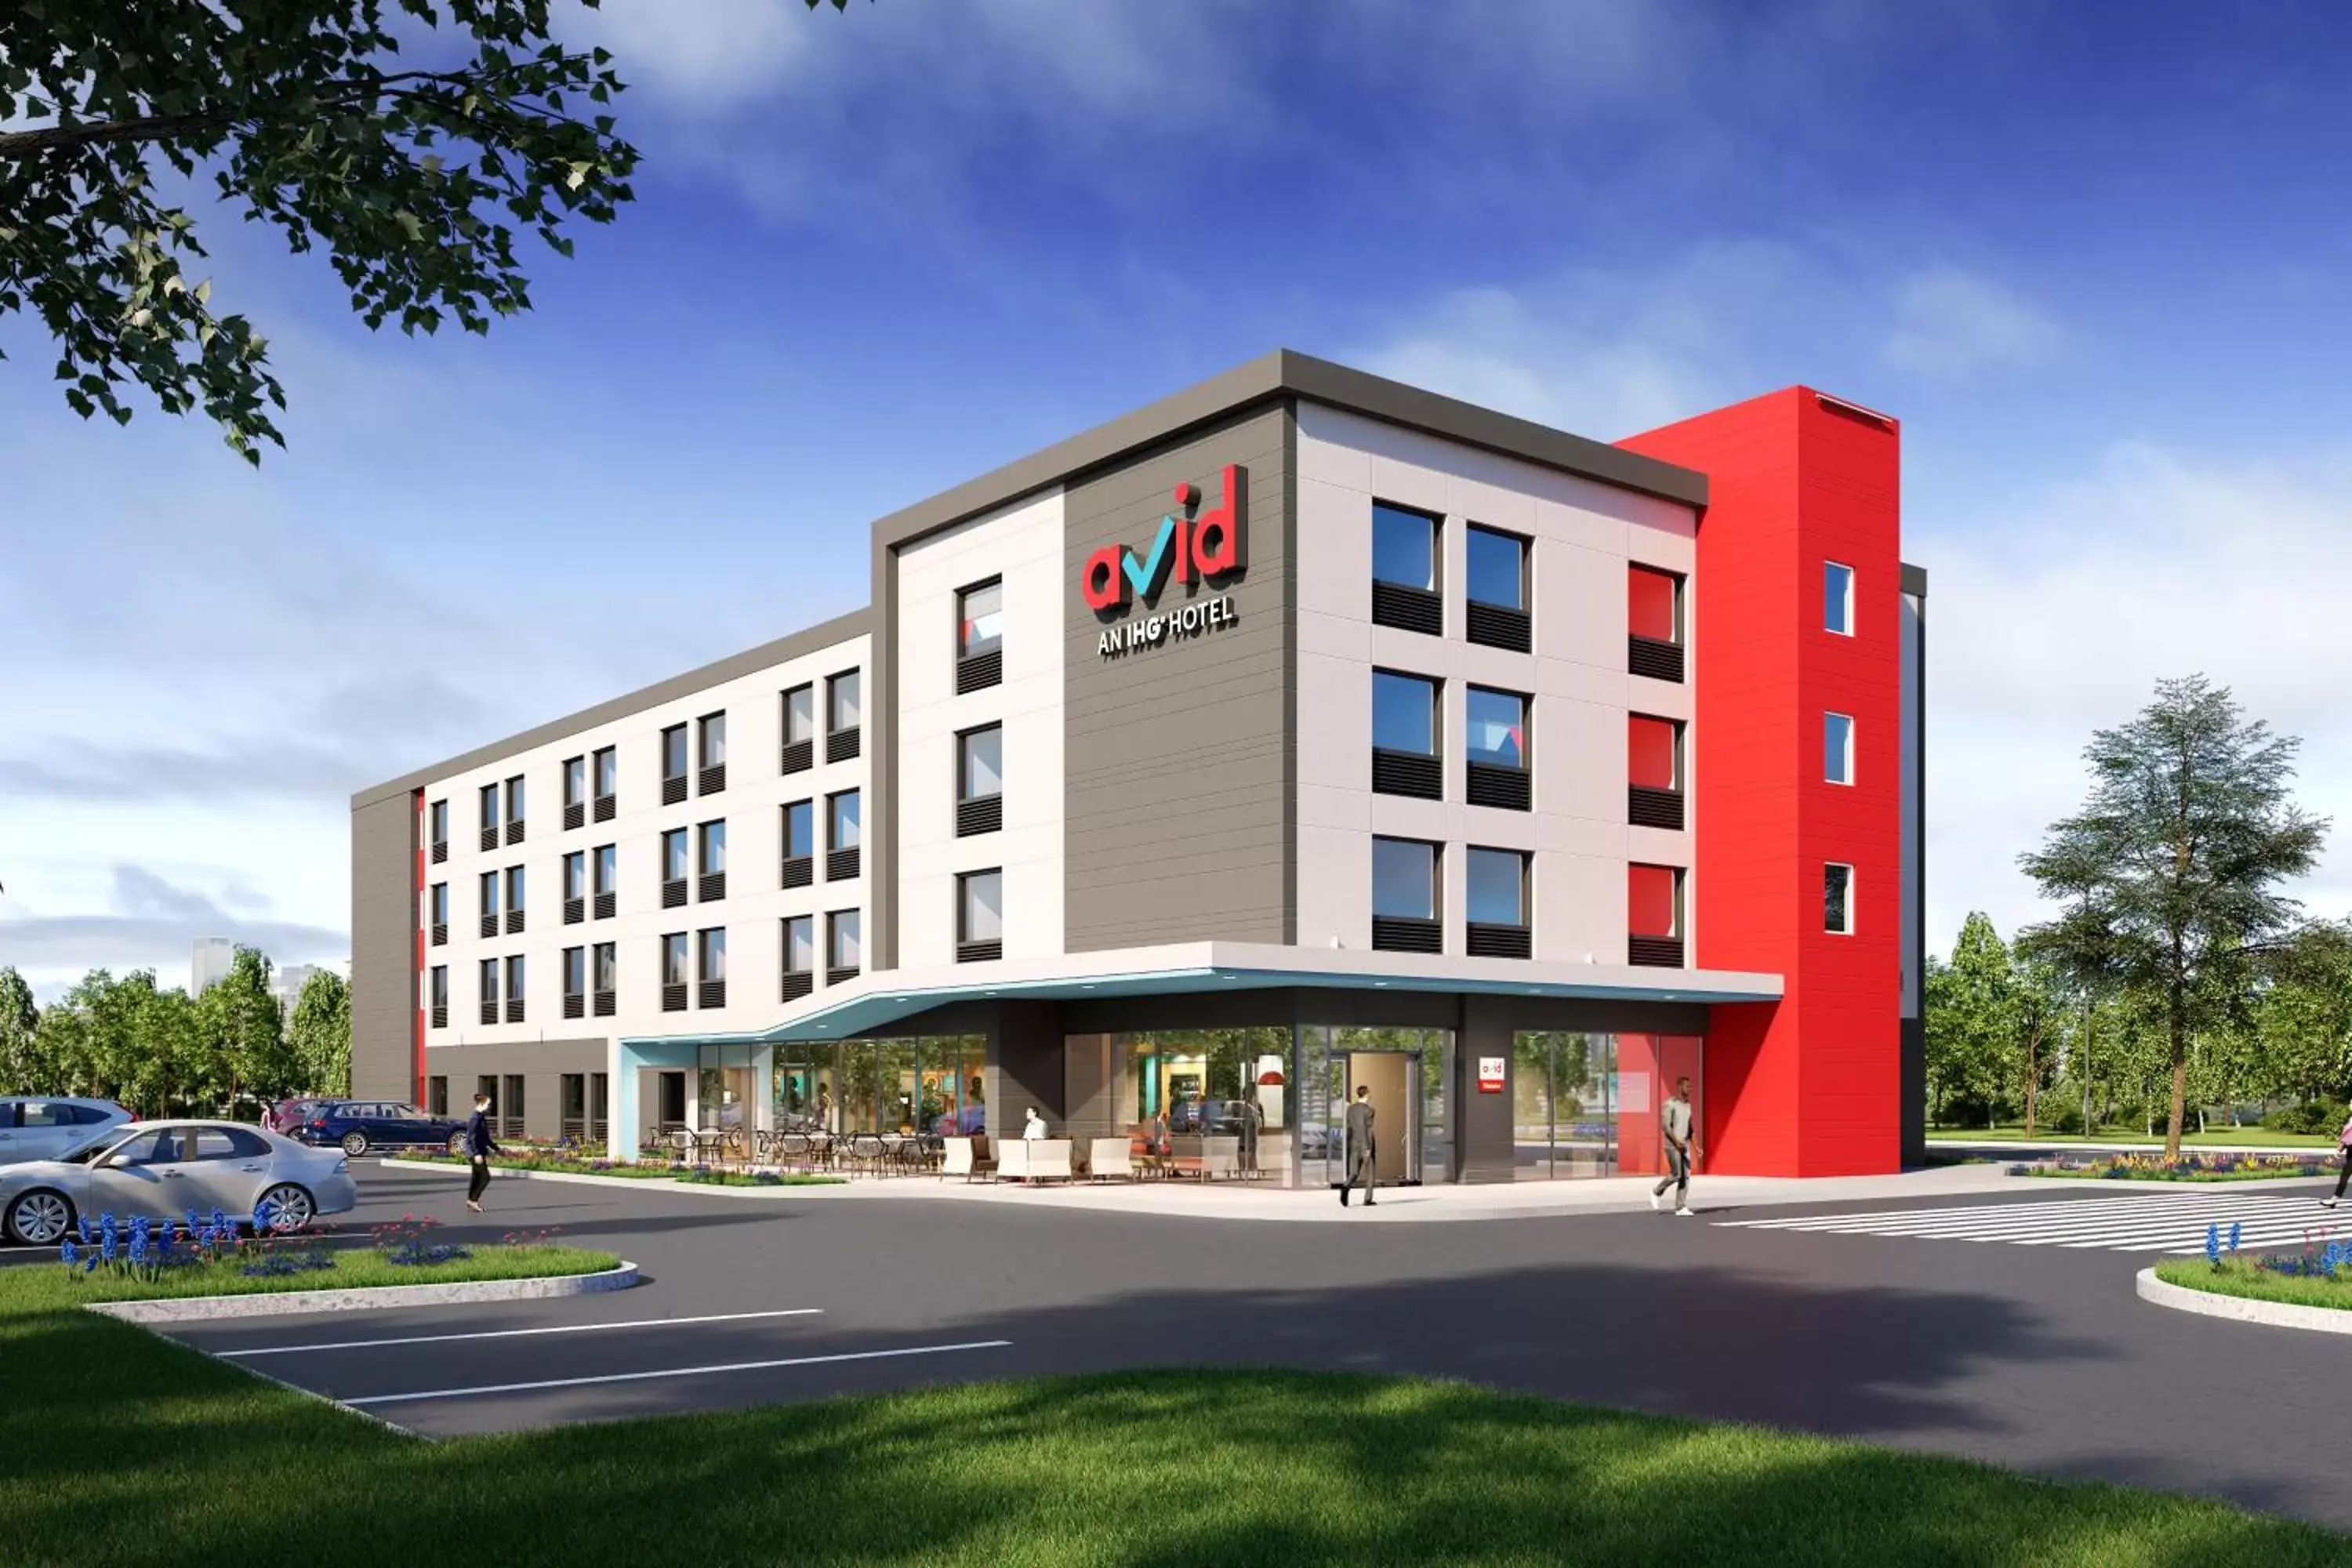 Property Building in avid hotels - Chicago O Hare - Des Plaines